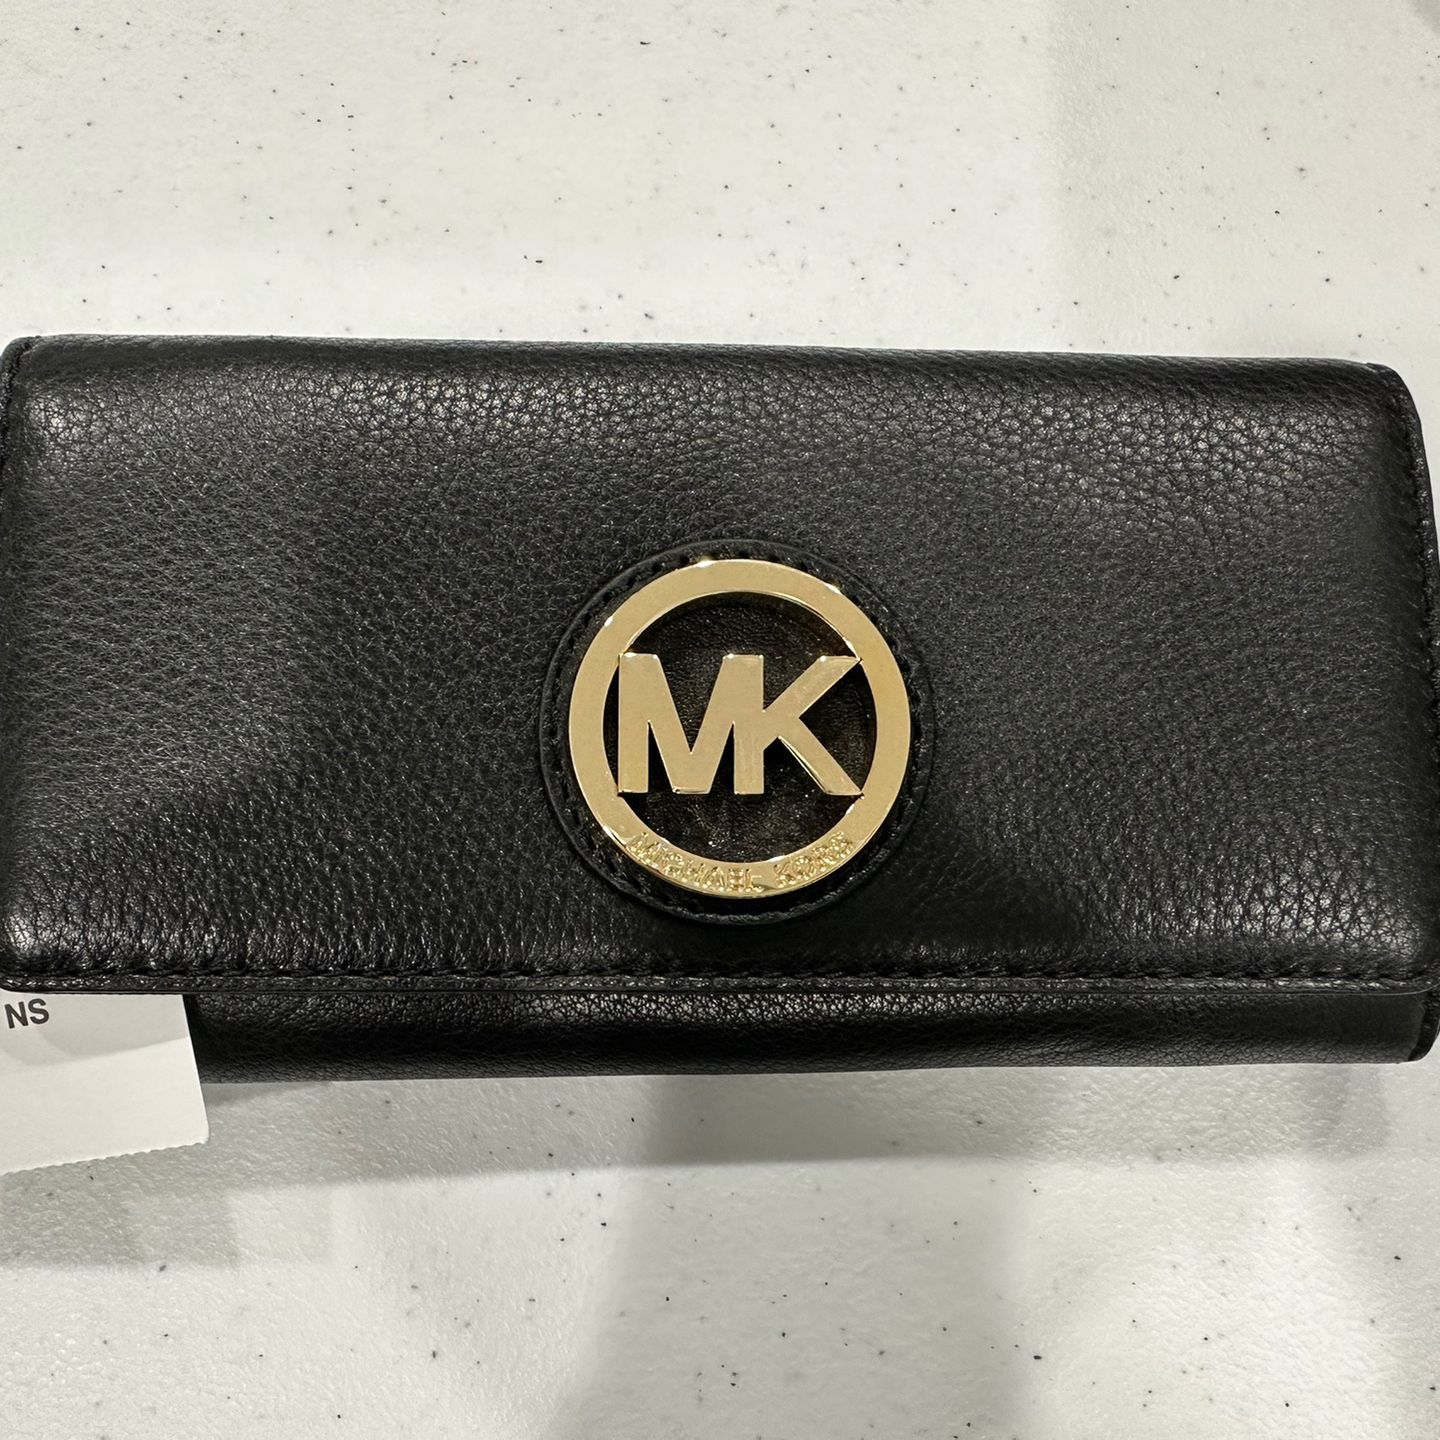 NWT MIchael Kors Cooper Leather Billfold Wallet Black for Sale in Castaic,  CA - OfferUp